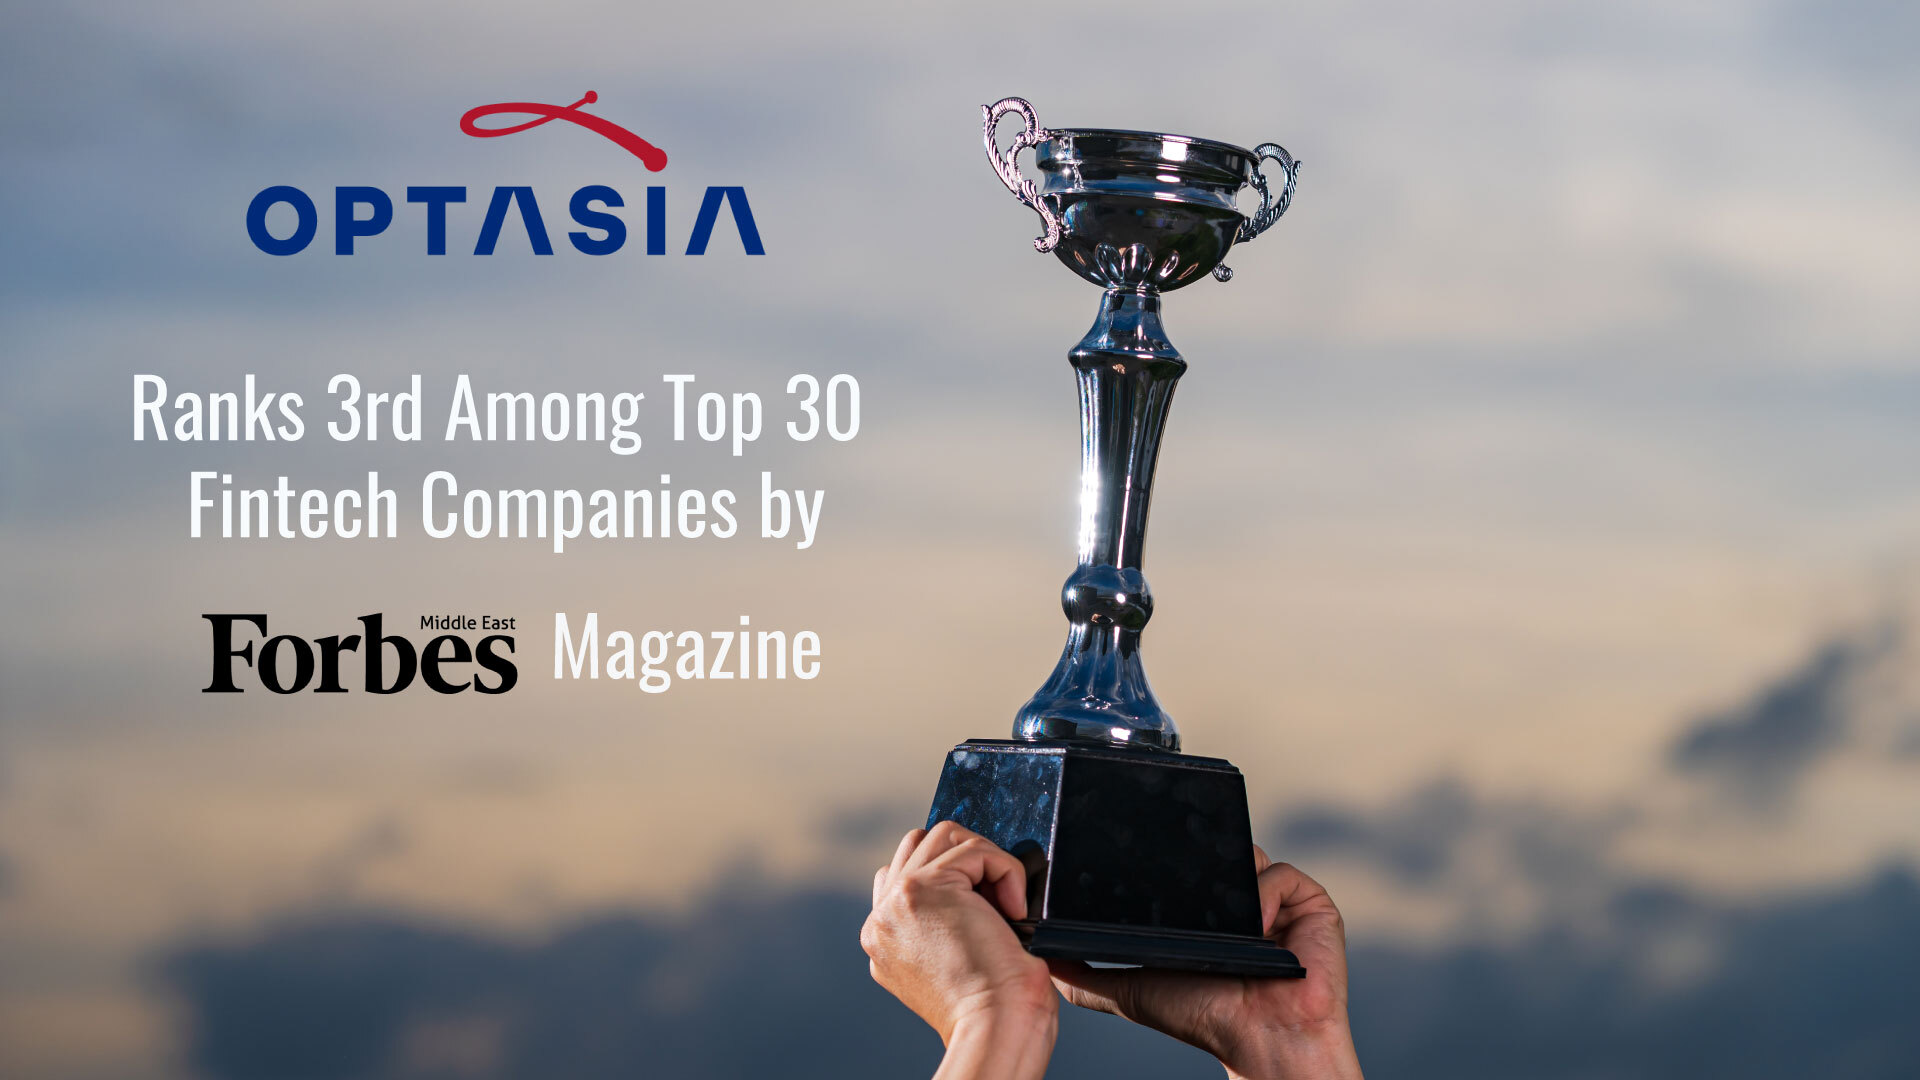 Optasia Ranks Third Among Top Fintech Companies According to Forbes Middle East Magazine